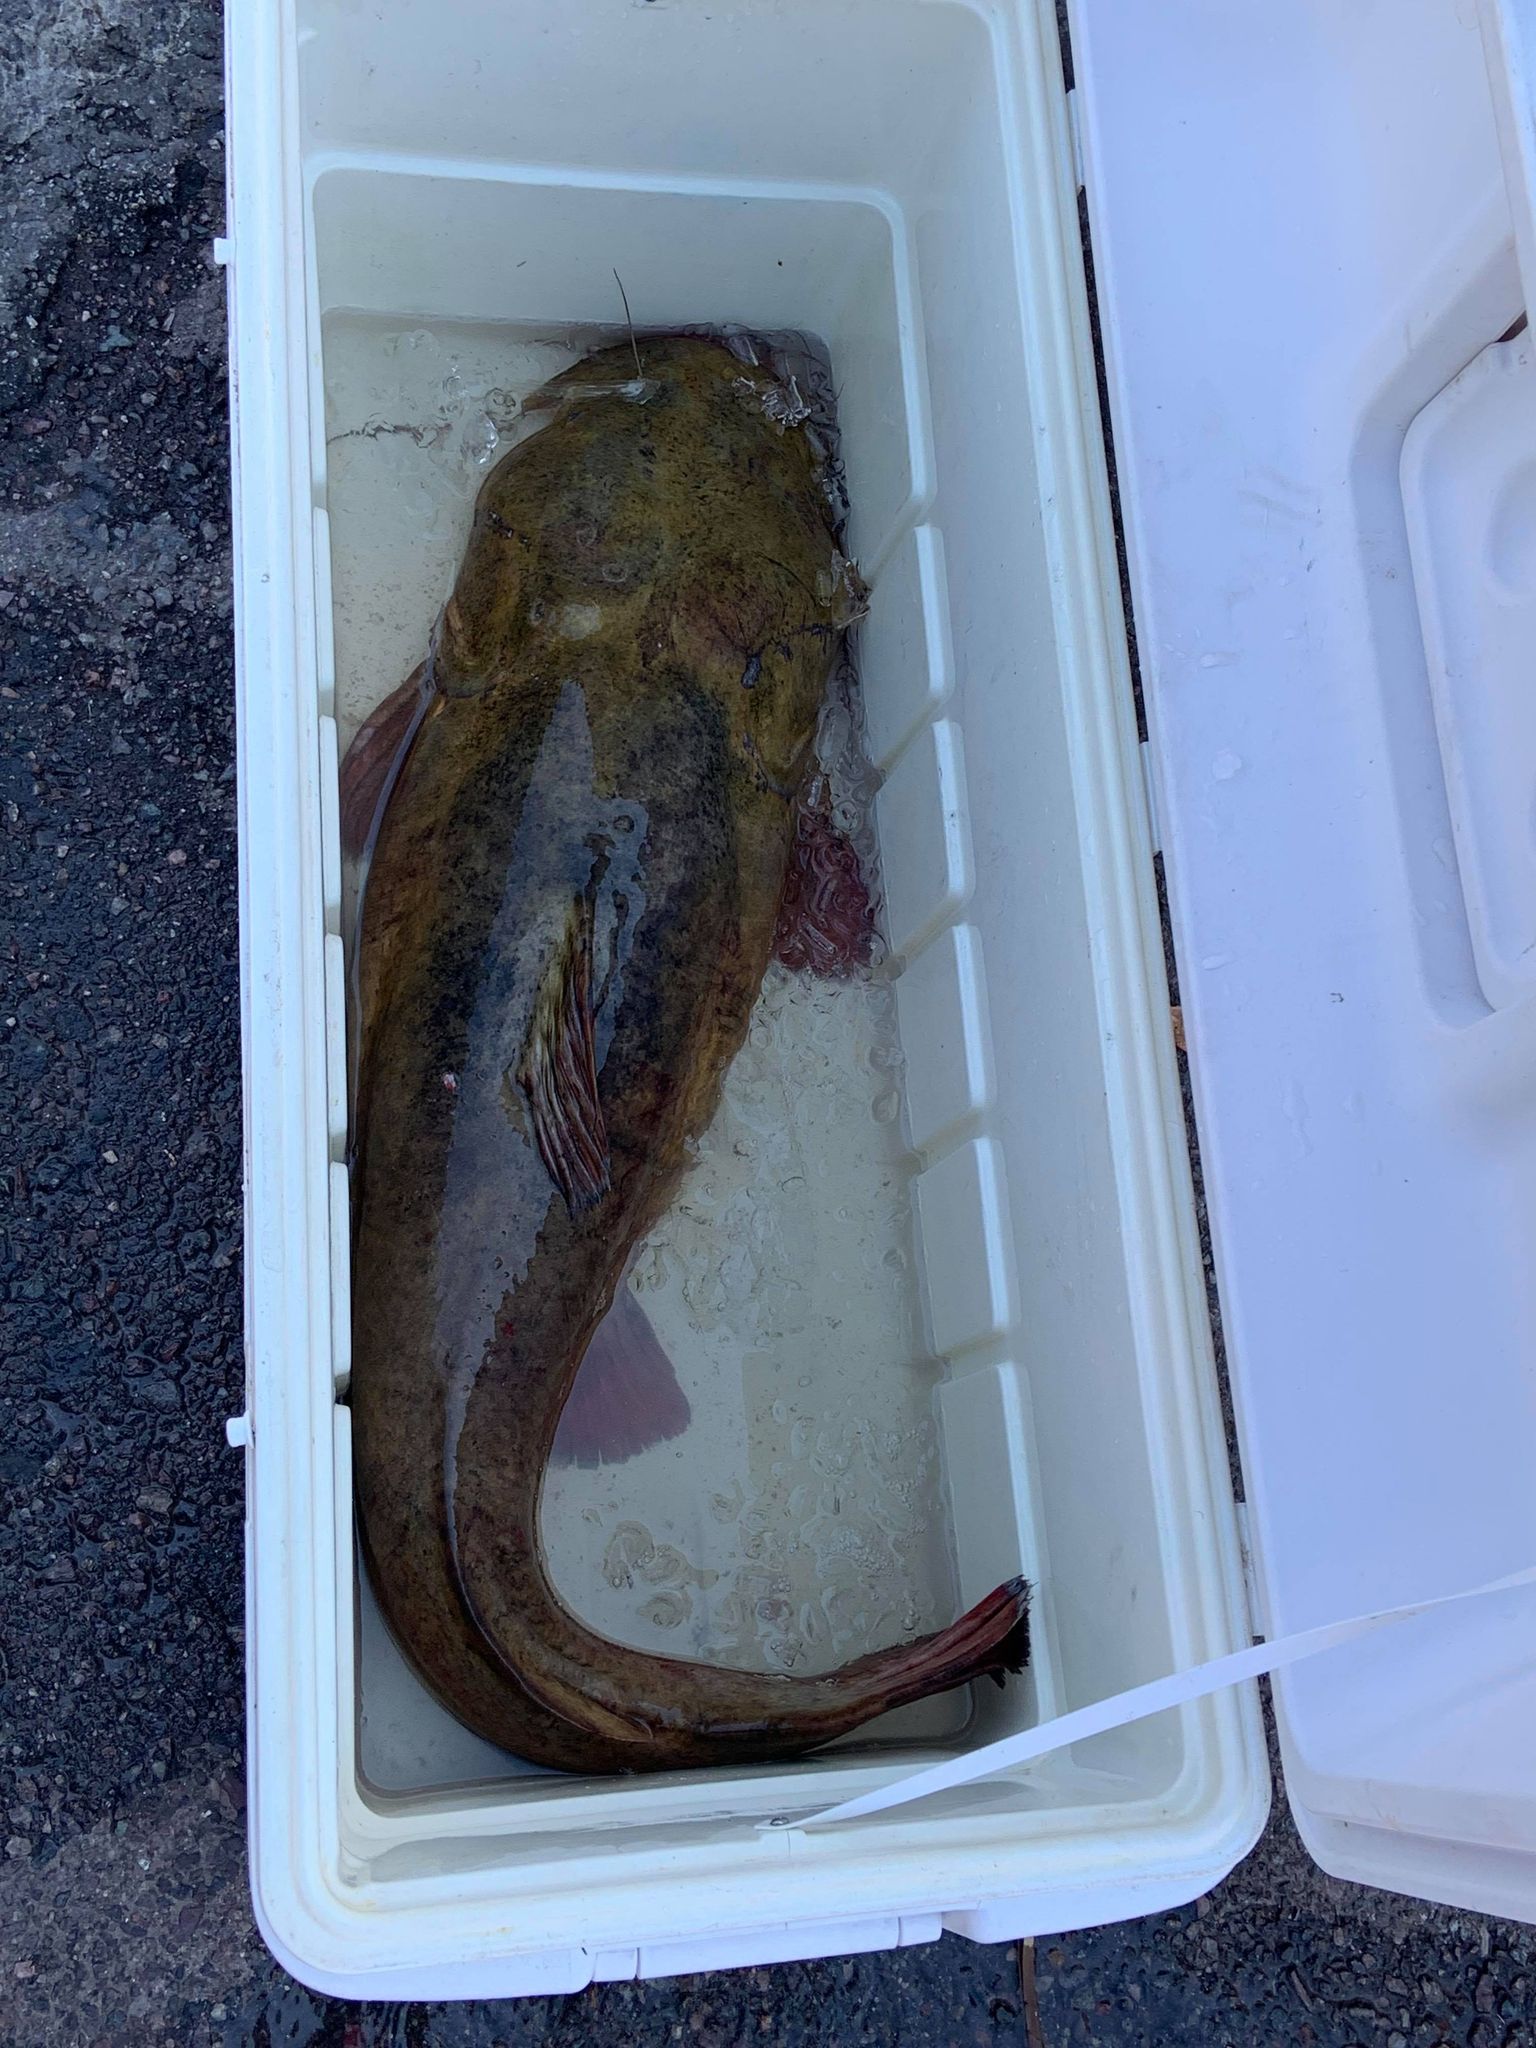 This Arizona flathead catfish was weighed then served to the anglers' family.